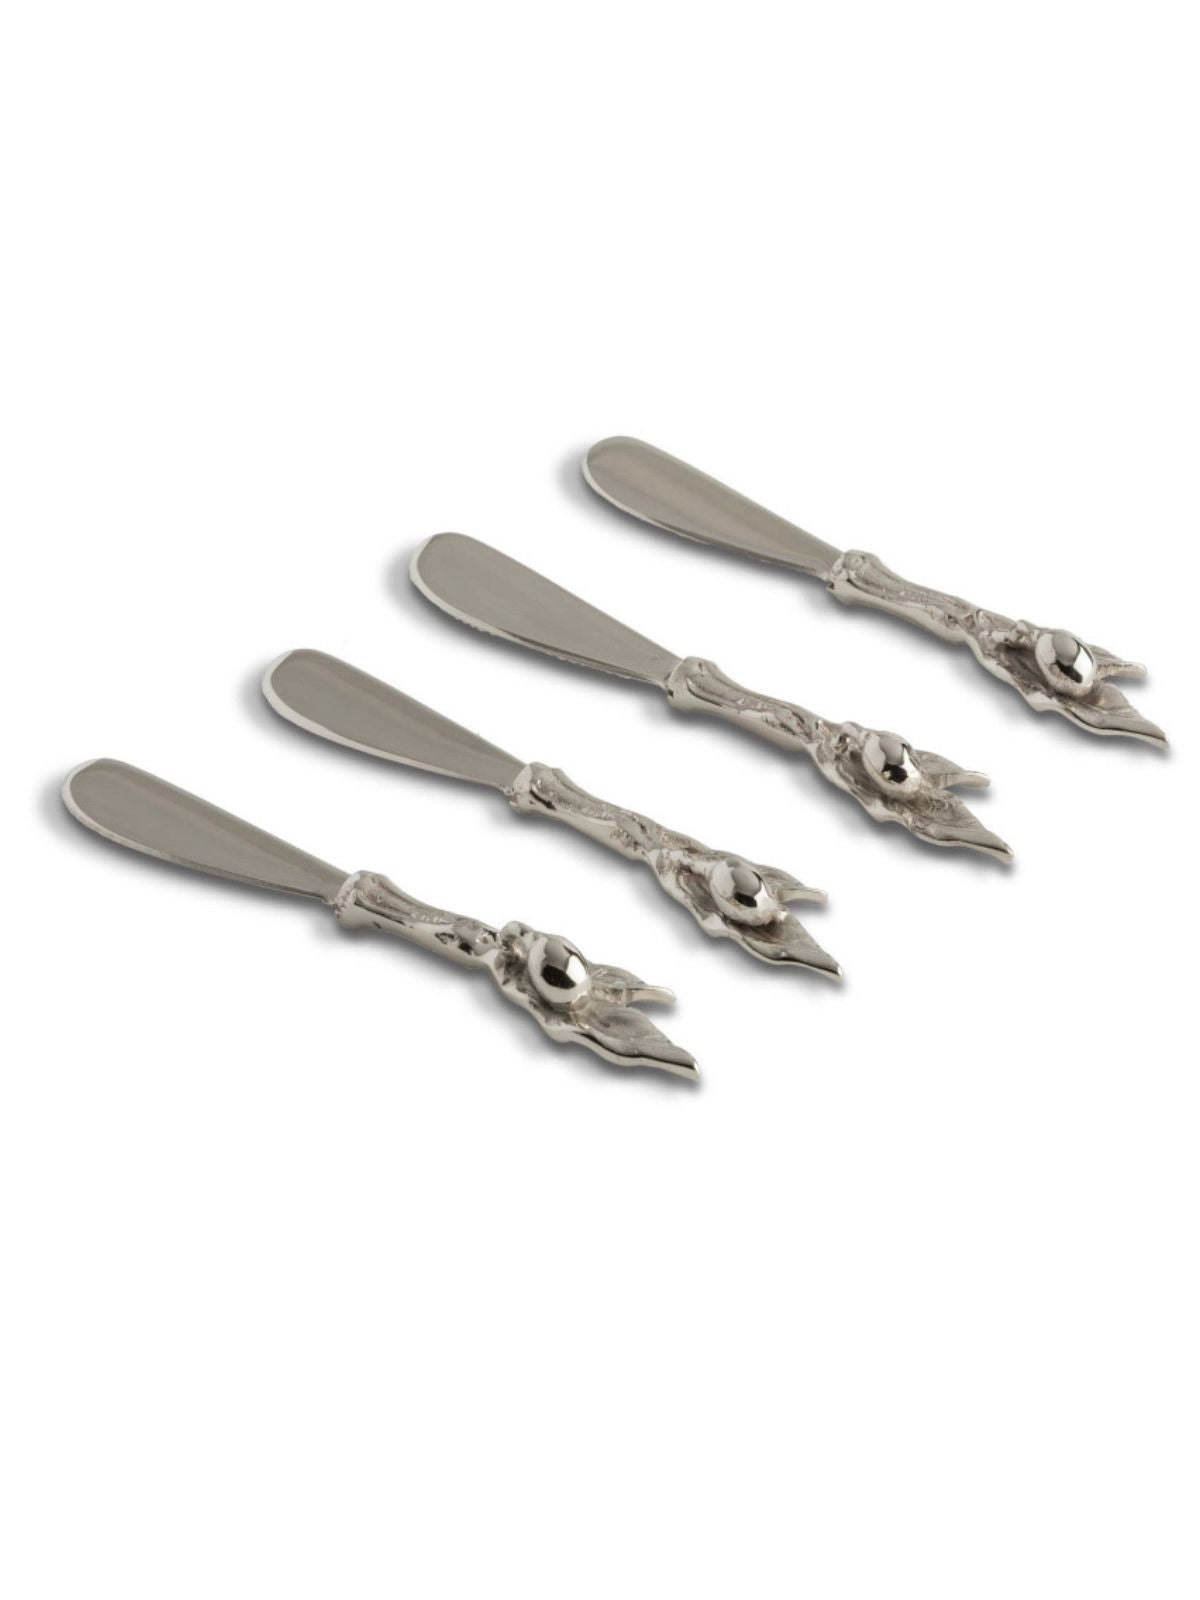 Stainless Steel Spreaders with Olive Branch Designed Handles.